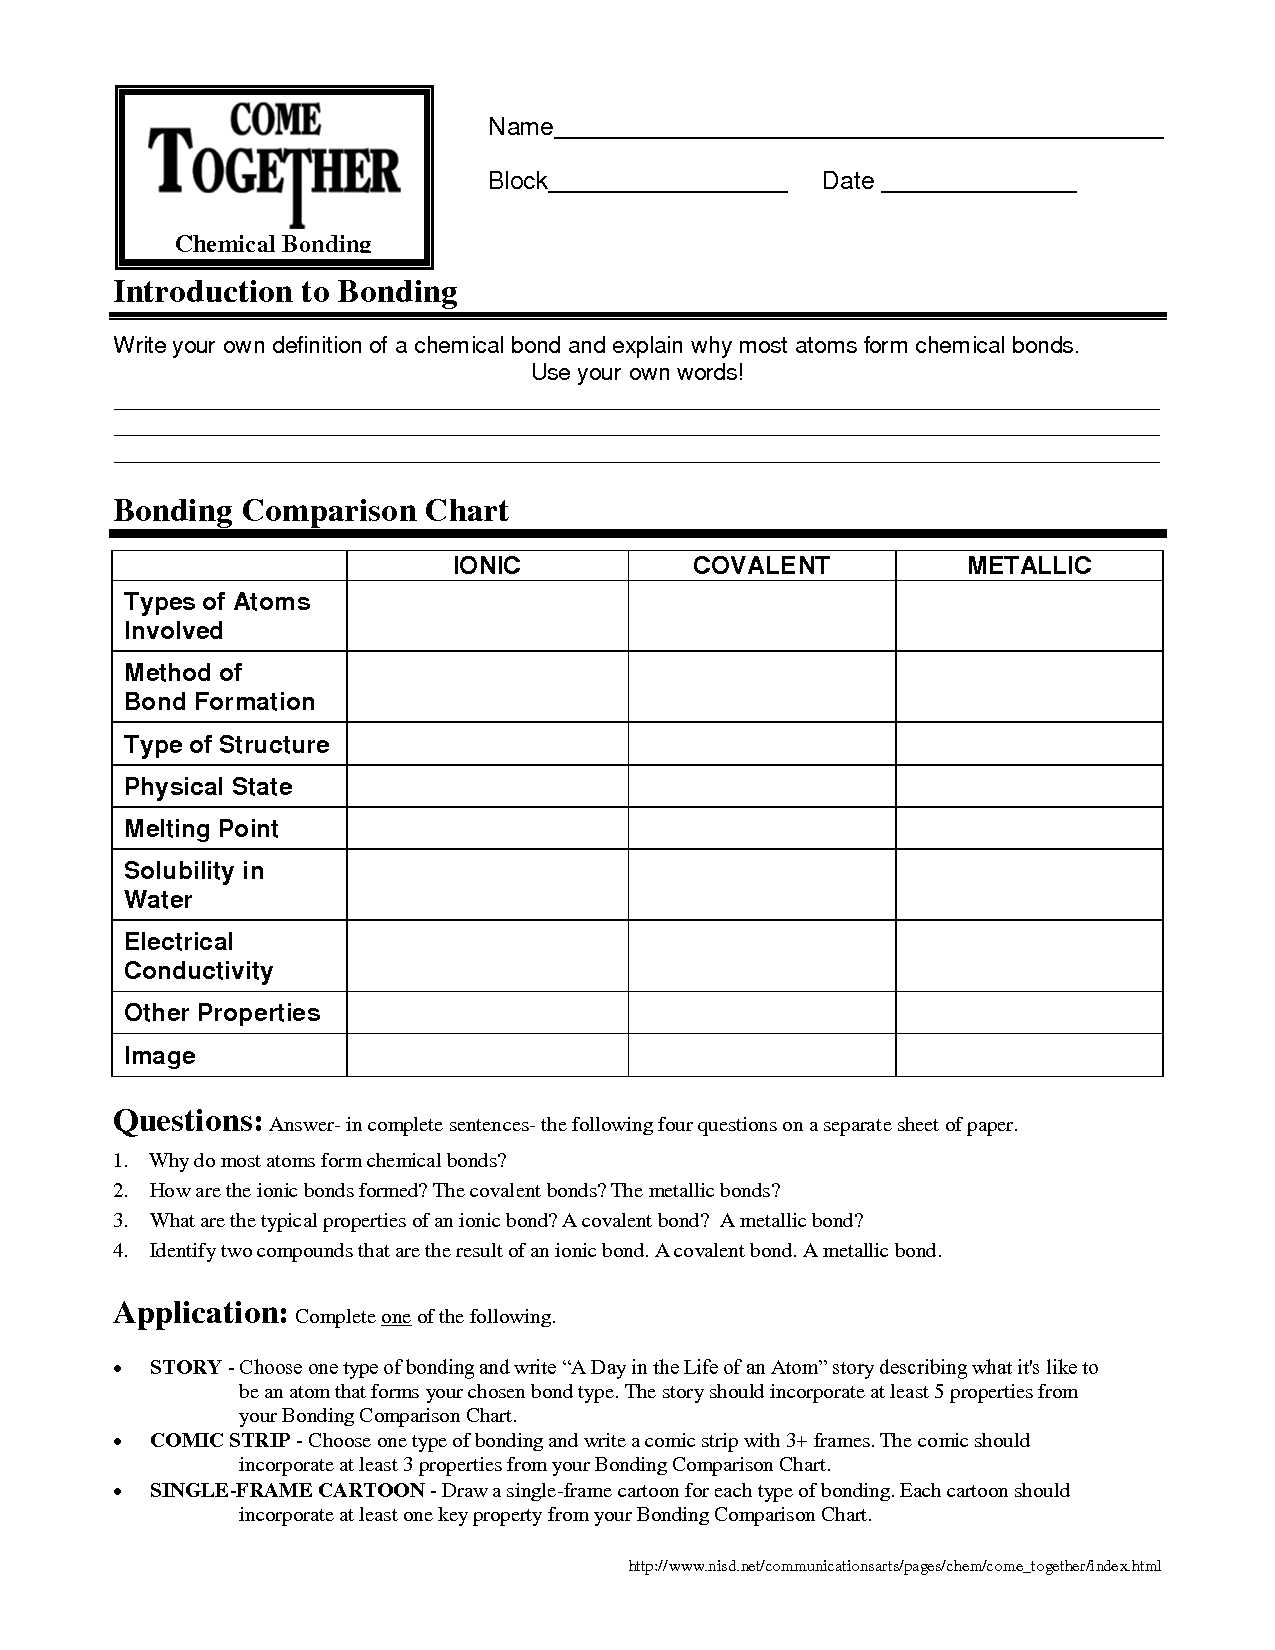 Worksheet Chemical Bonding Ionic and Covalent Answers or Chemical Bonds Ionic Bonds Worksheet Answers Image Collections